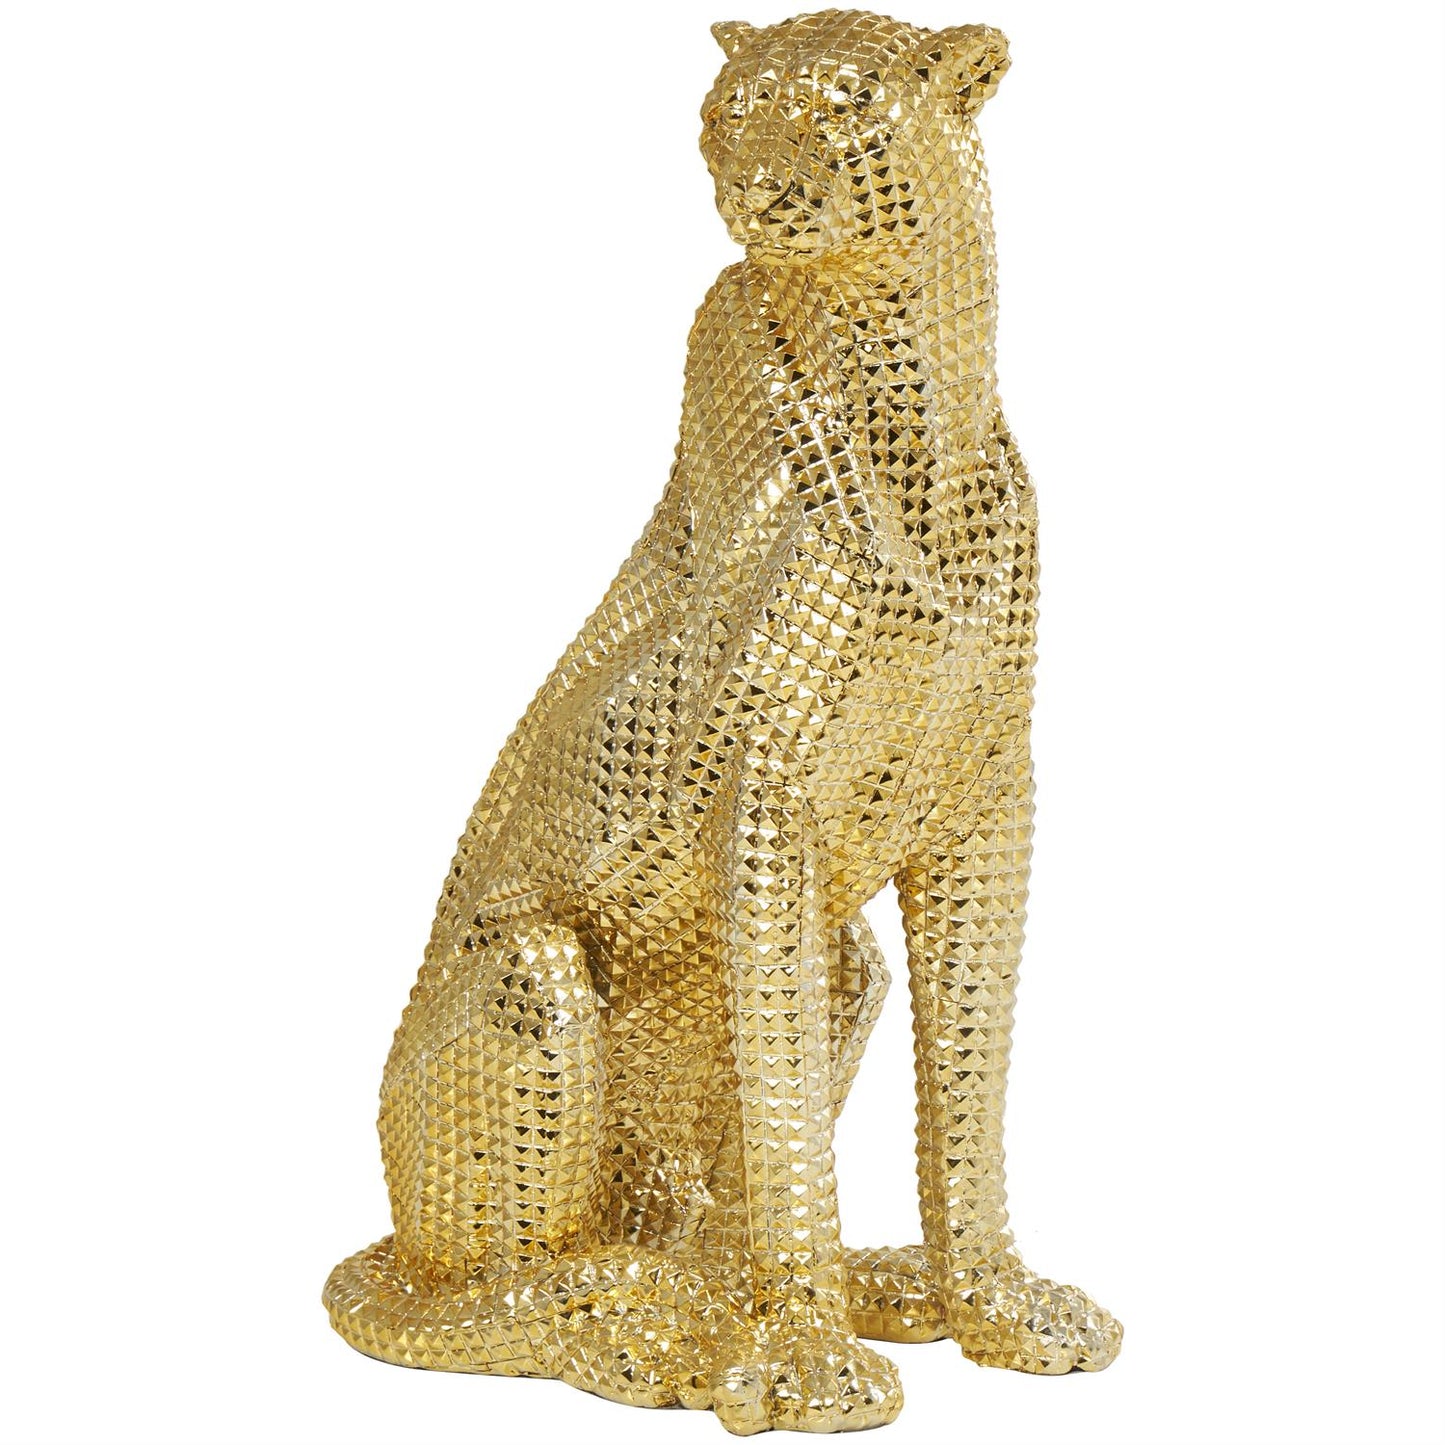 Gold Resin Leopard sitting Sculpture with Diamond Face